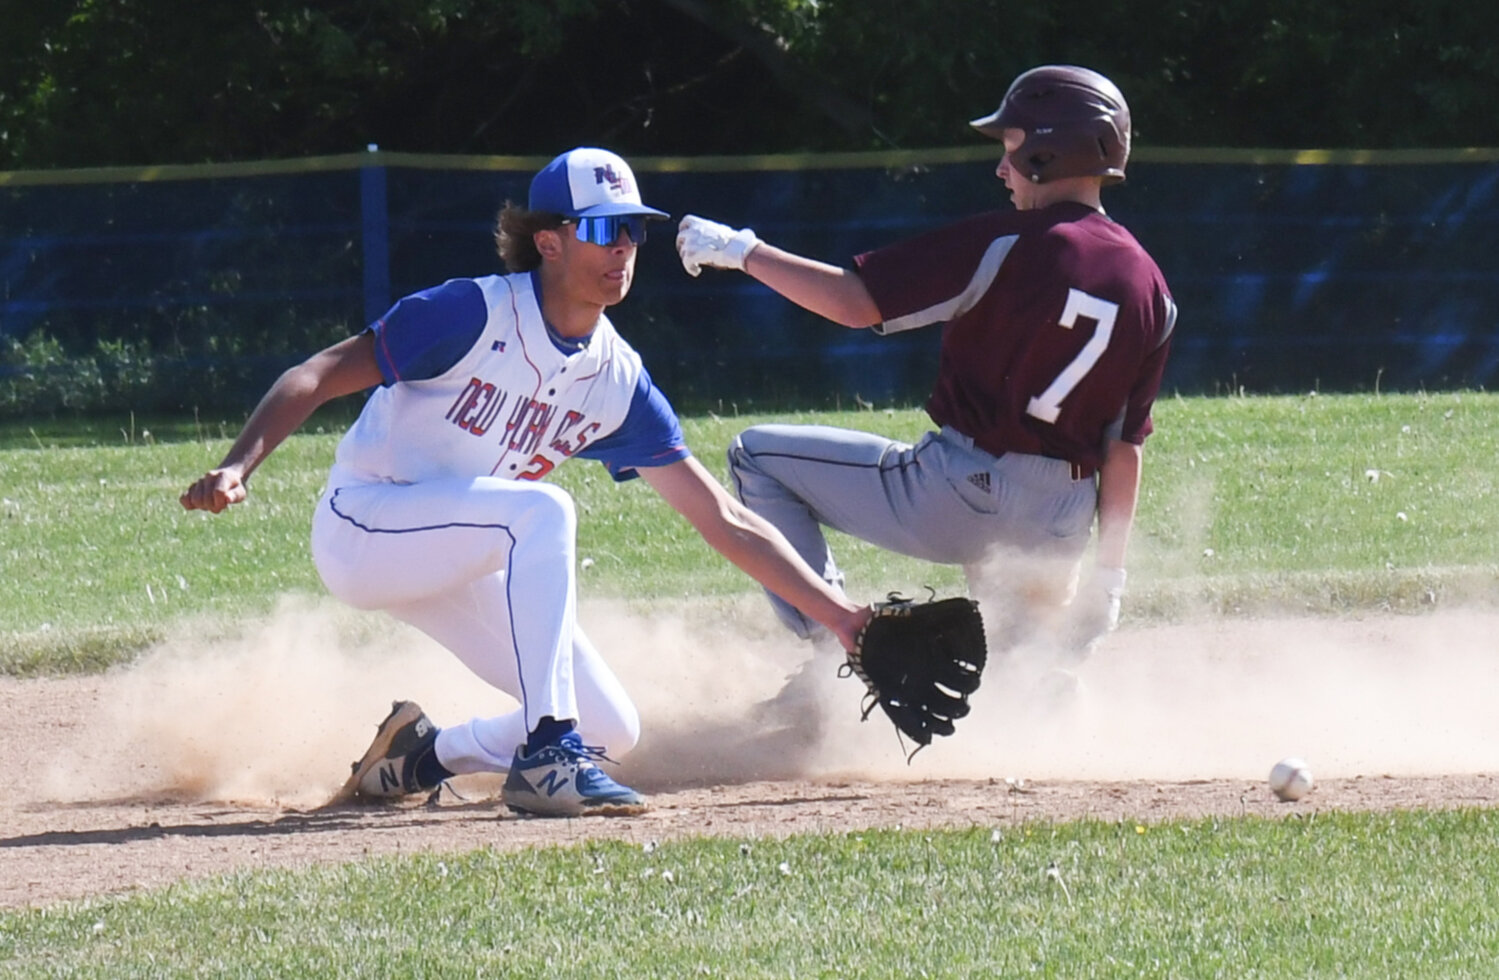 Oriskany's Anthony Kernan (7) slides in safely ahead of a throw to New York Mills' Frank Calhoun Thursday in the Section III Class D quarterfinal game. Kernan had a pair of runs batted in during the team's 10-3 win.